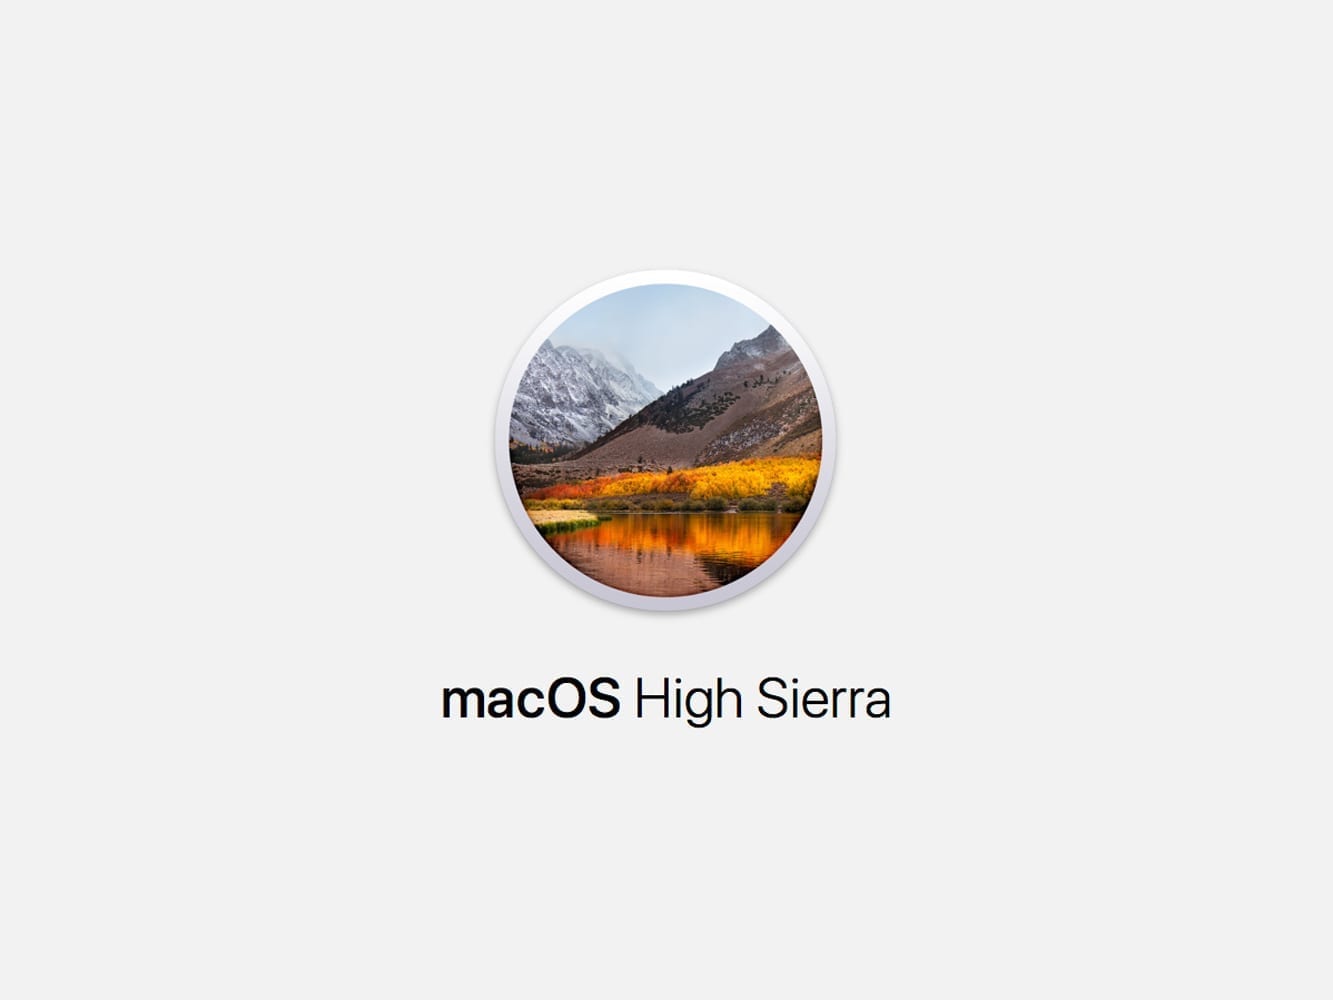 Installing macOS in the macOS Server 2011